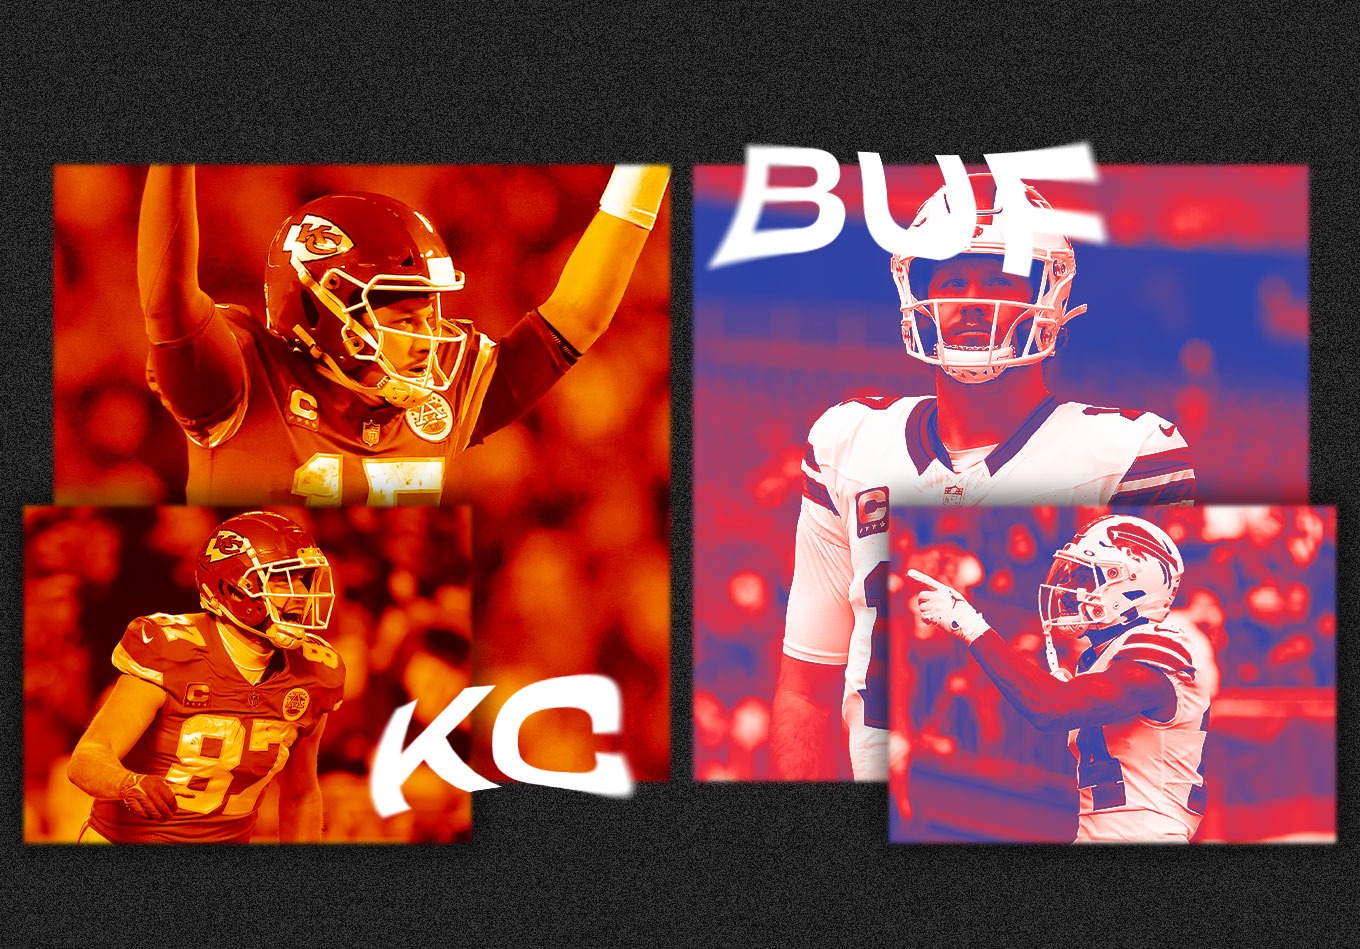 Bills vs Chiefs Prediction: Can Either of These AFC Powers Regain Their Championship Form?